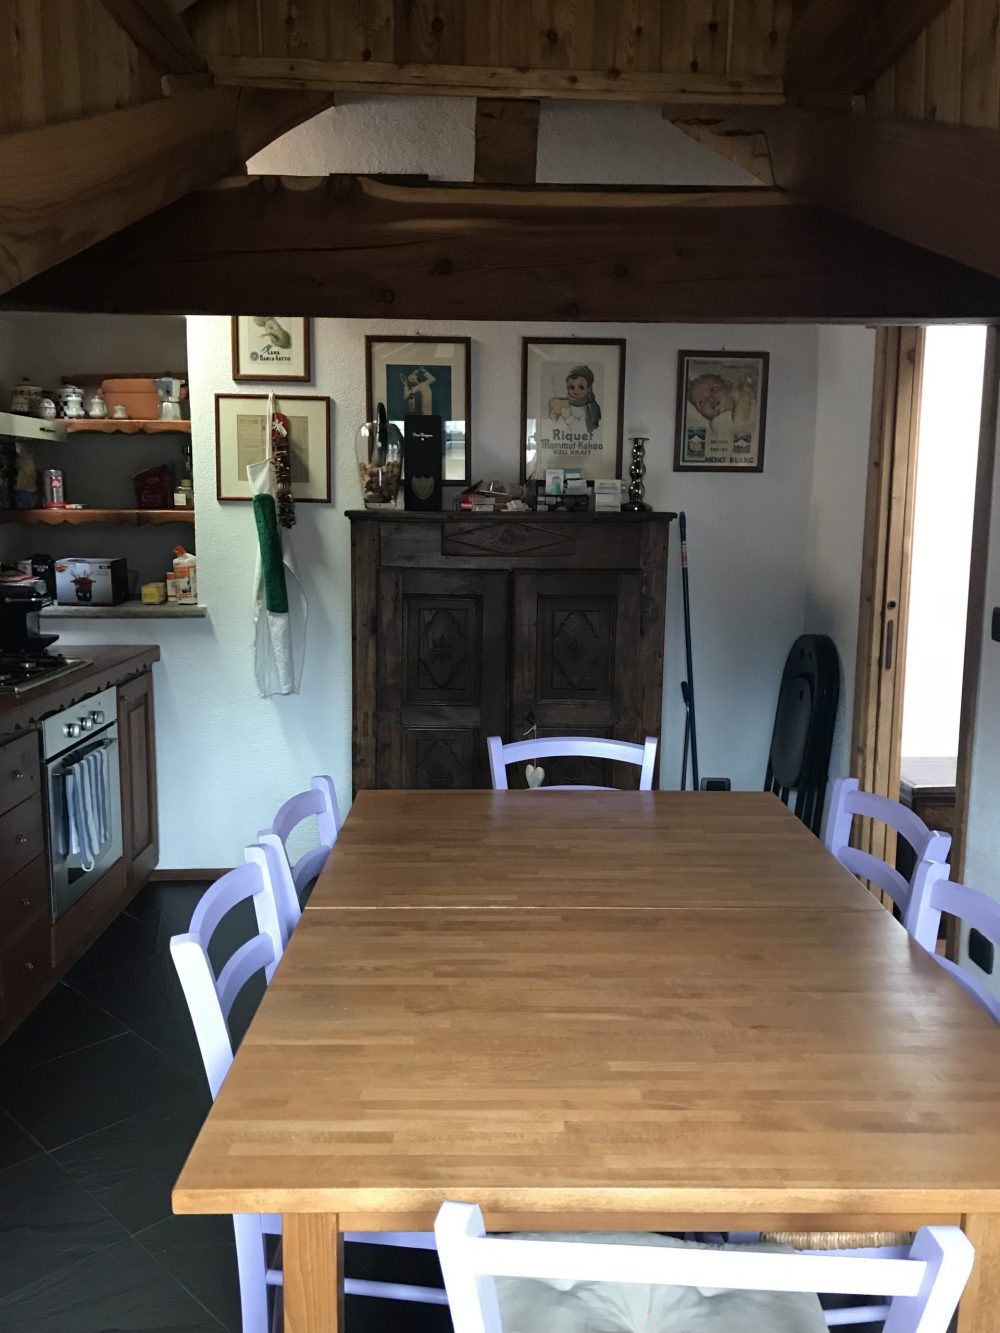 The kitchen of the house in La Salle. My experience of buying a home in the Italian Alps.